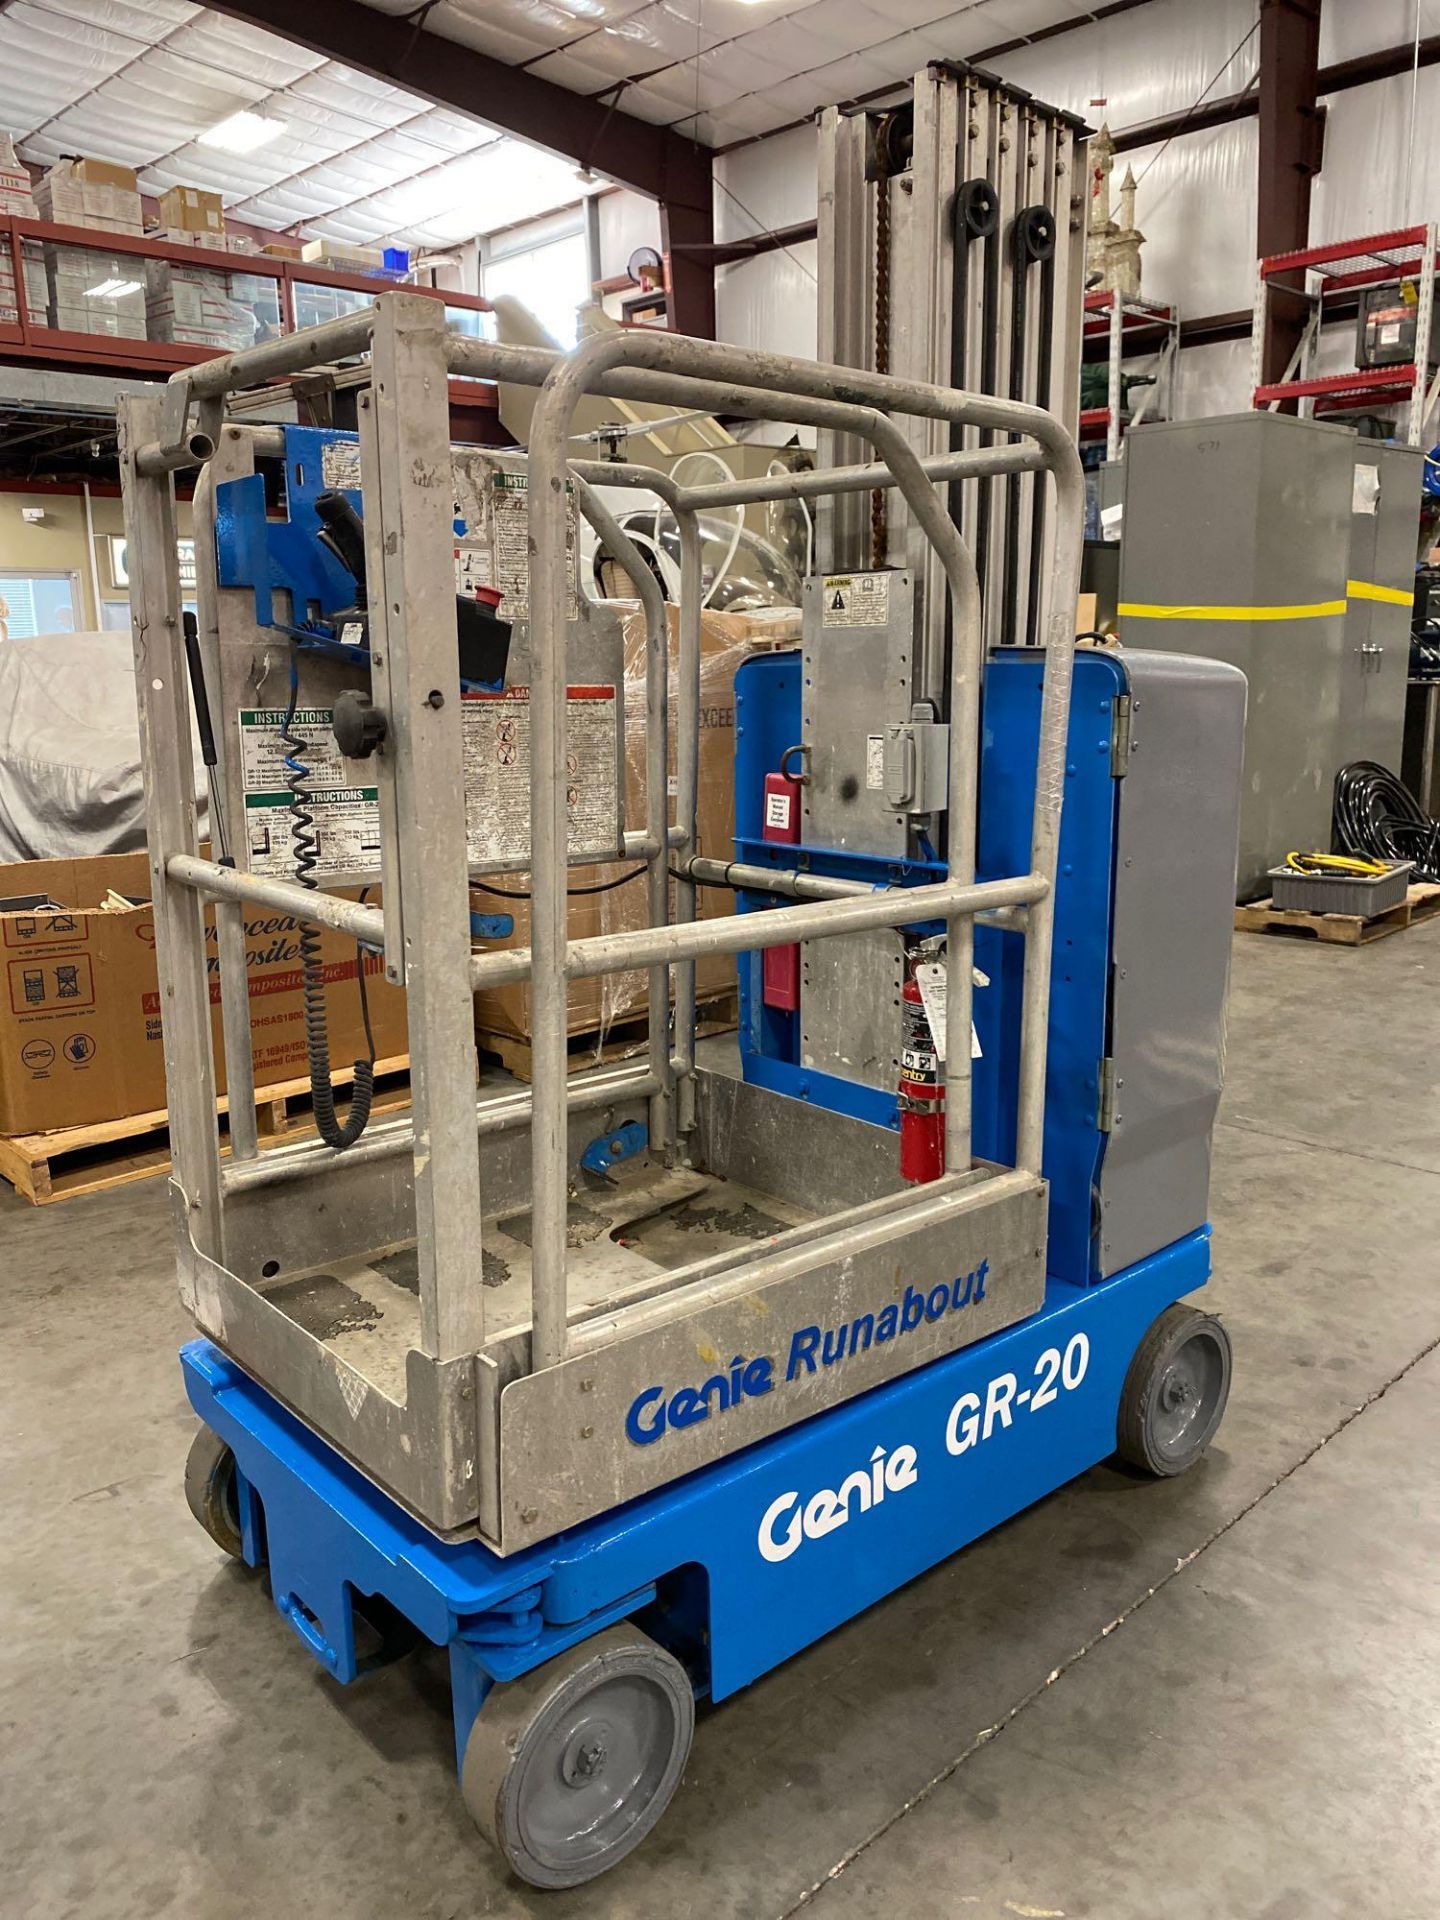 2014 GENIE GR-20 ELECTRIC MAN LIFT, 20' PLATFORM HEIGHT, SELF PROPELLED, 207 HOURS SHOWING - Image 7 of 16